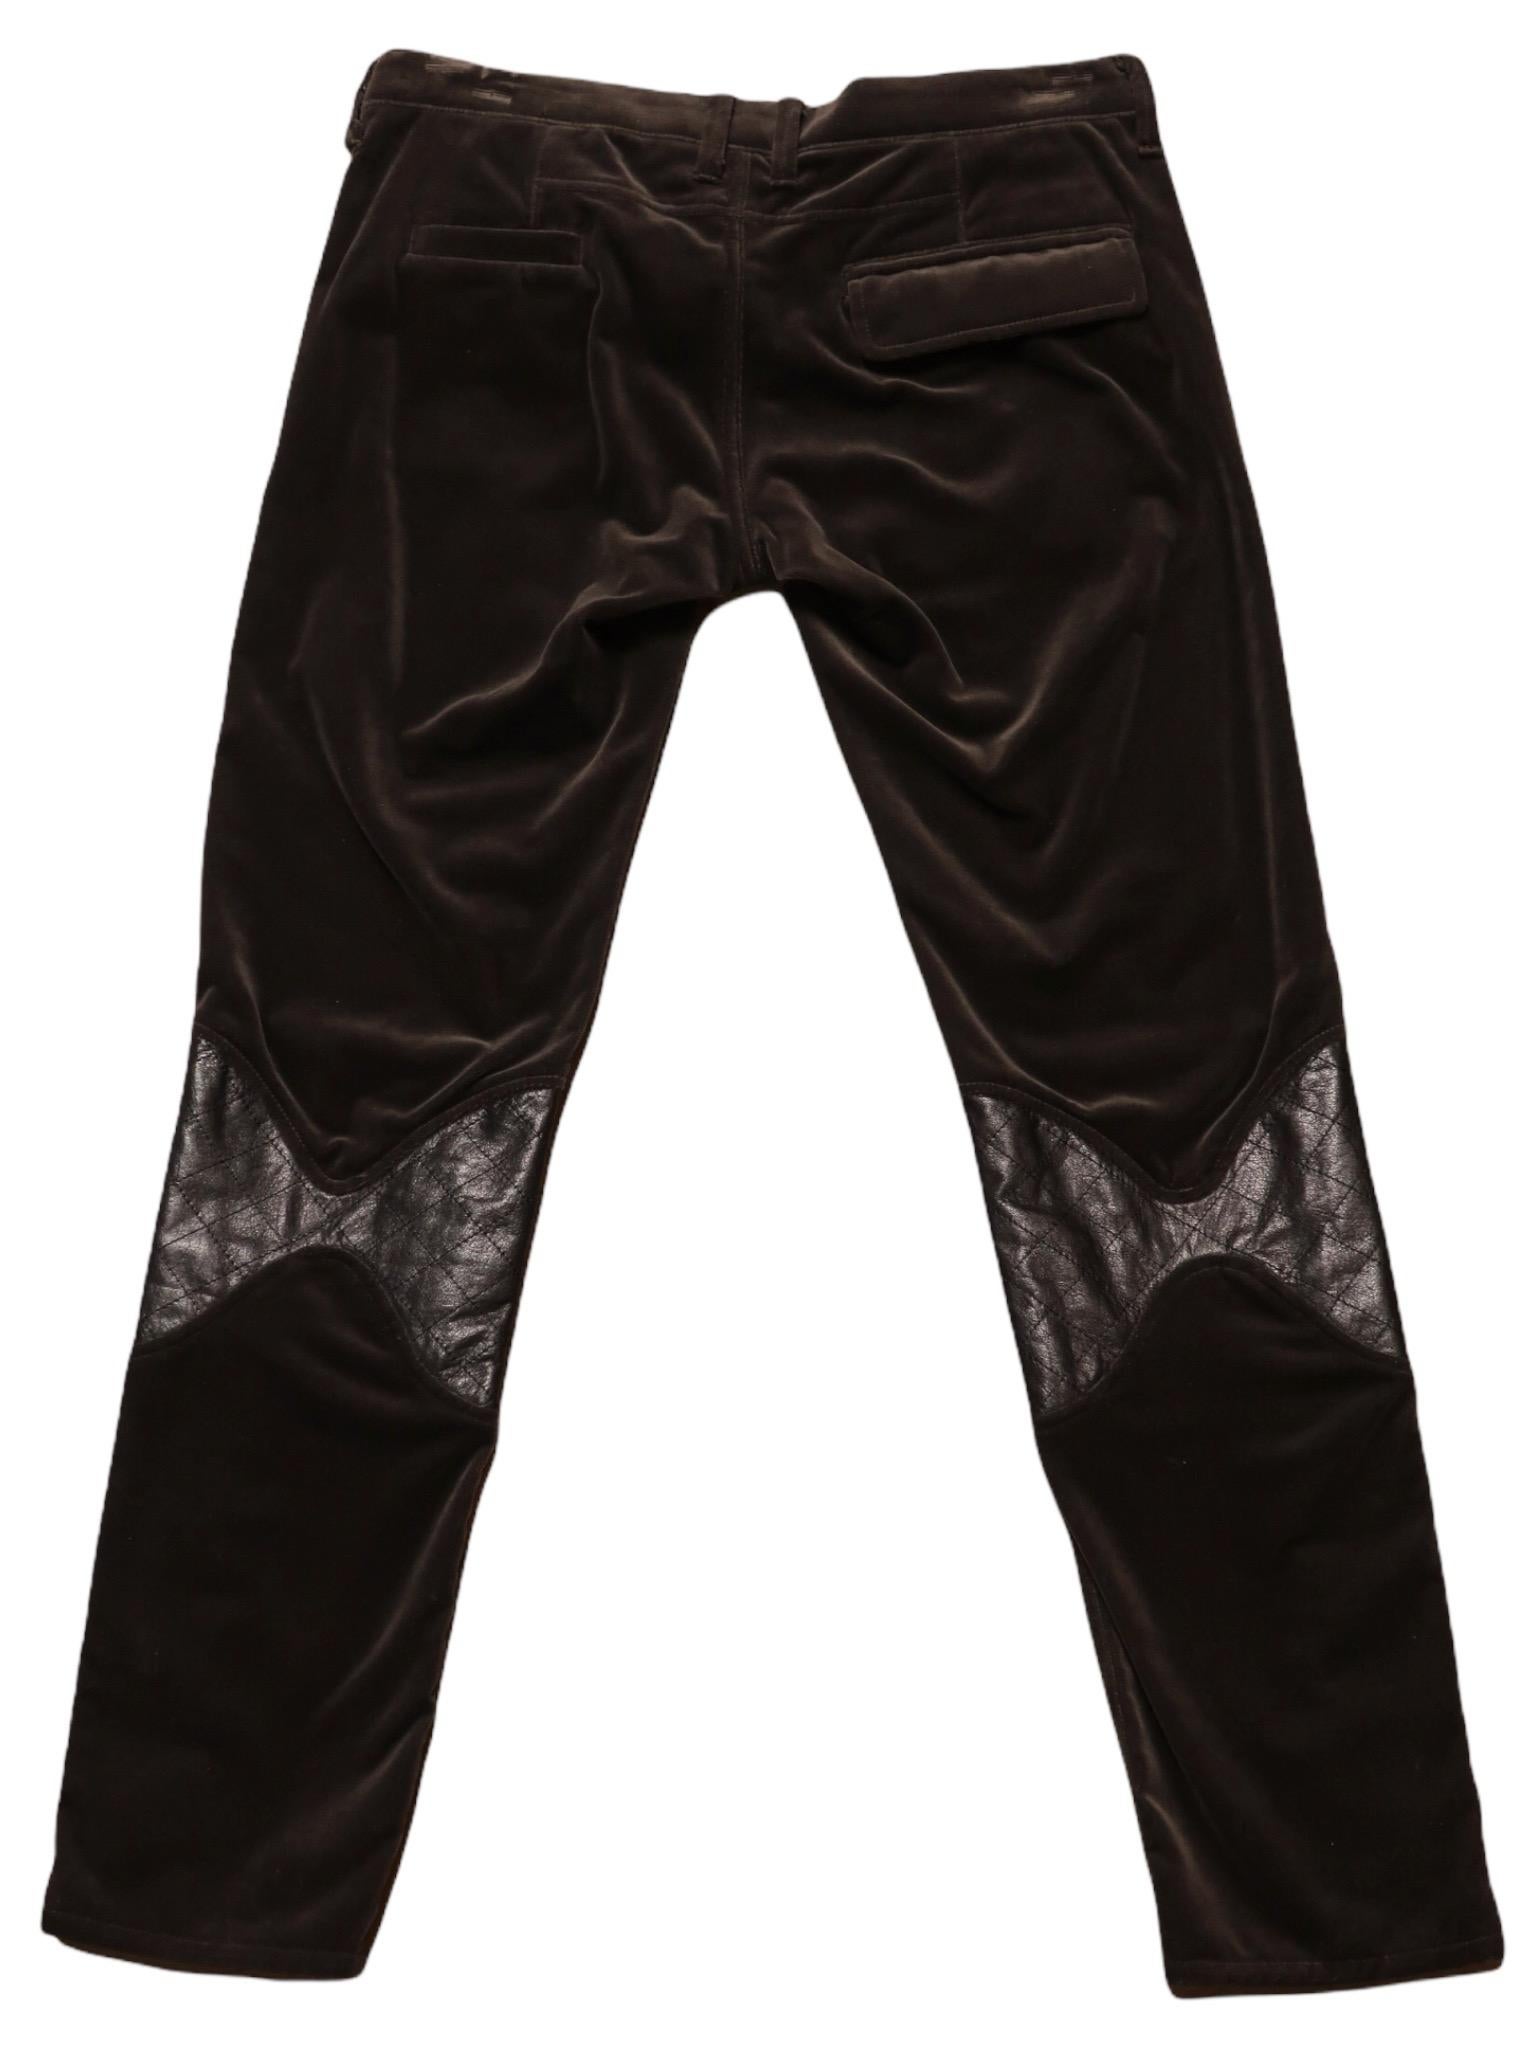 Vintage Undercover charcoal-colored velvety soft straight pant with leather knee patches and zippered legs. Zip and snap front with front and back pockets.